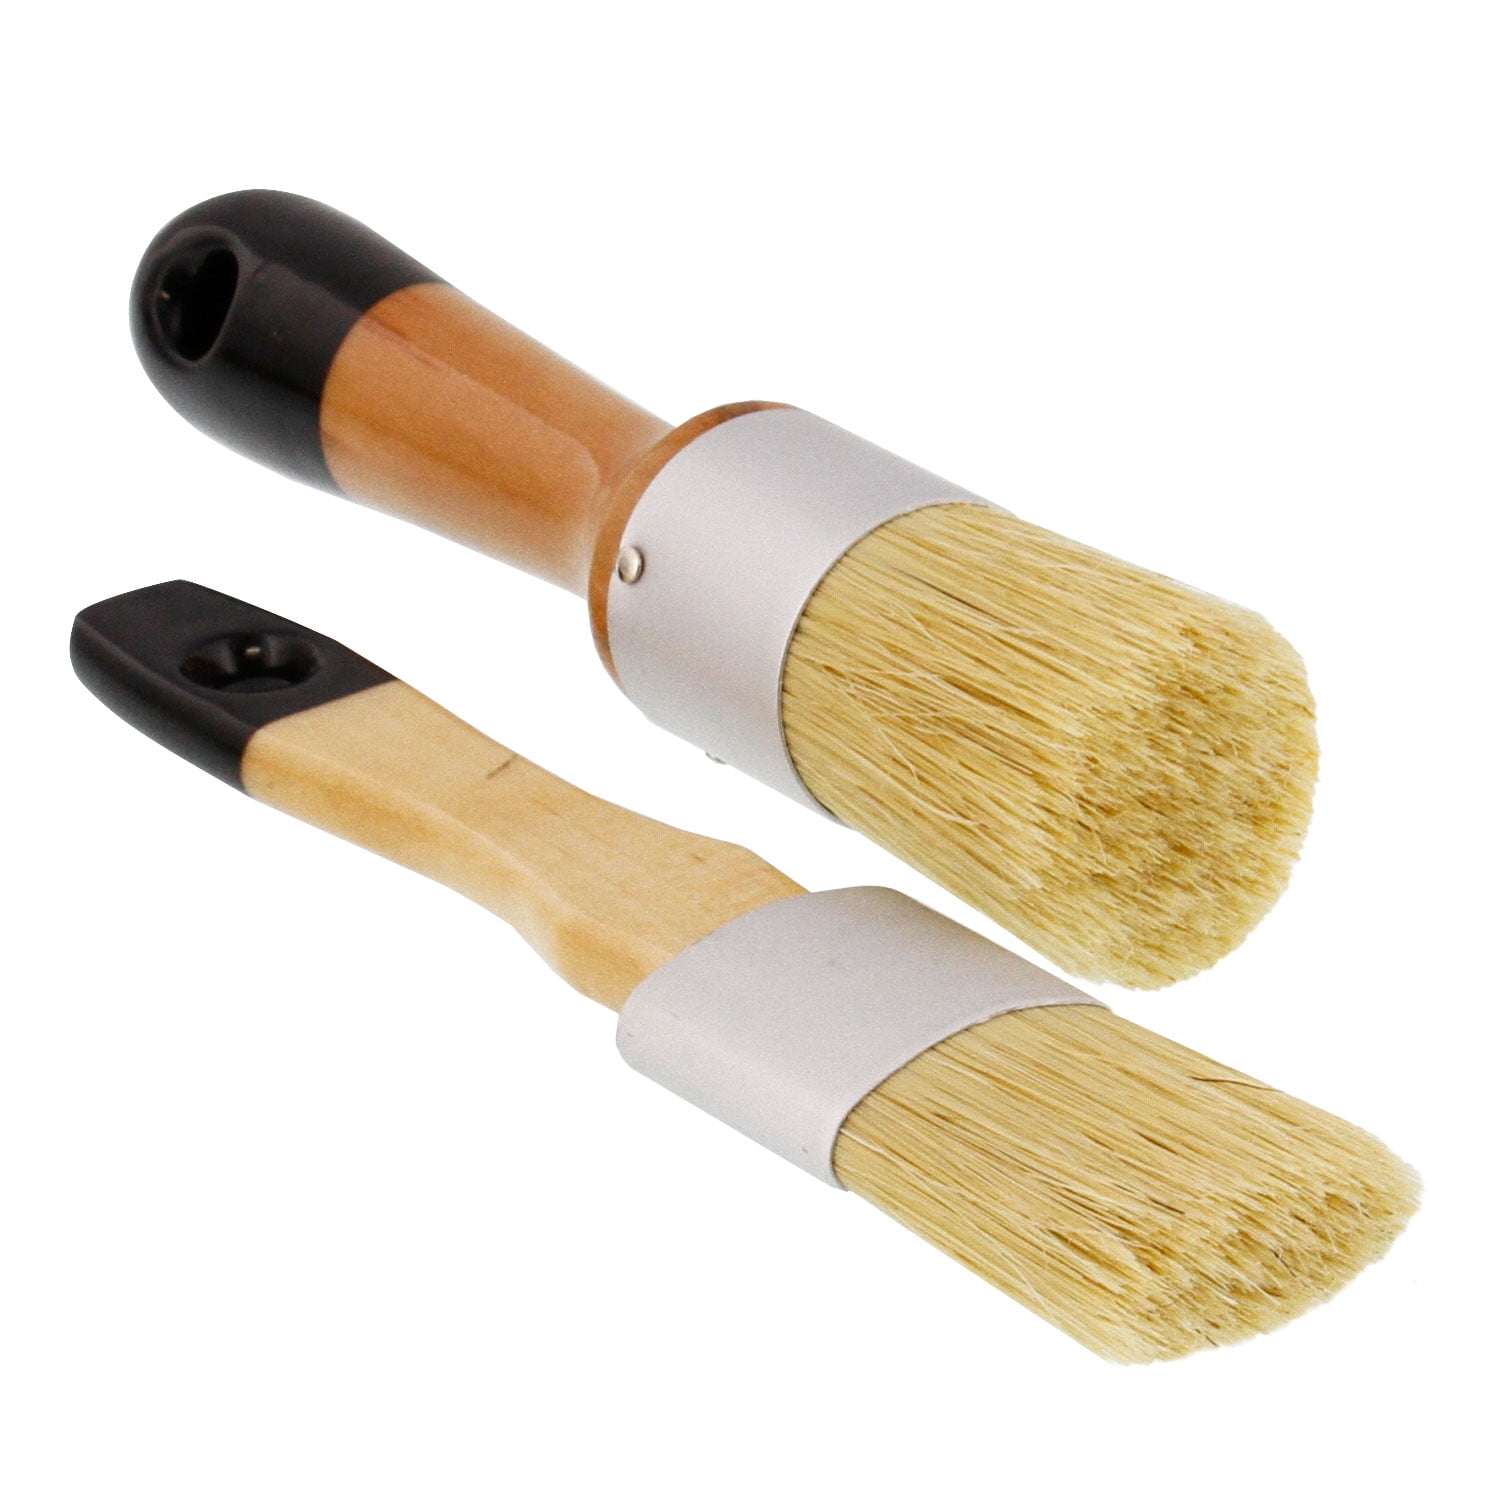 Chalk Furniture Paint Brushesw Natural Boar Bristles 1st Brush a Large Wax Brush or Wall Stencil Brush 2nd Brush a Medium Size Paint Brush